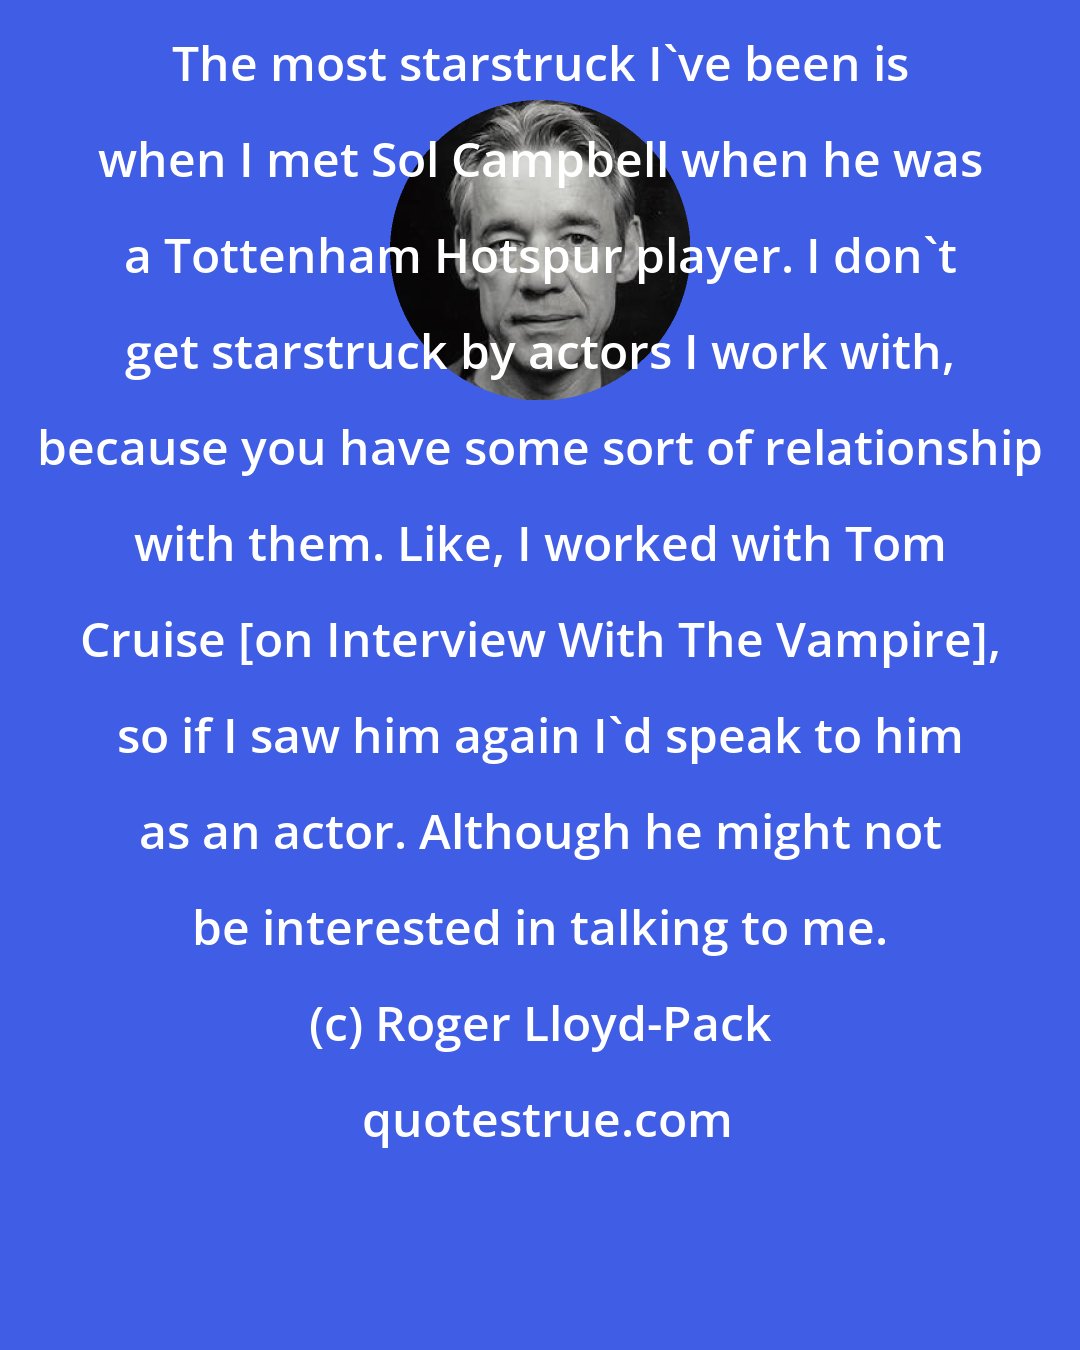 Roger Lloyd-Pack: The most starstruck I've been is when I met Sol Campbell when he was a Tottenham Hotspur player. I don't get starstruck by actors I work with, because you have some sort of relationship with them. Like, I worked with Tom Cruise [on Interview With The Vampire], so if I saw him again I'd speak to him as an actor. Although he might not be interested in talking to me.